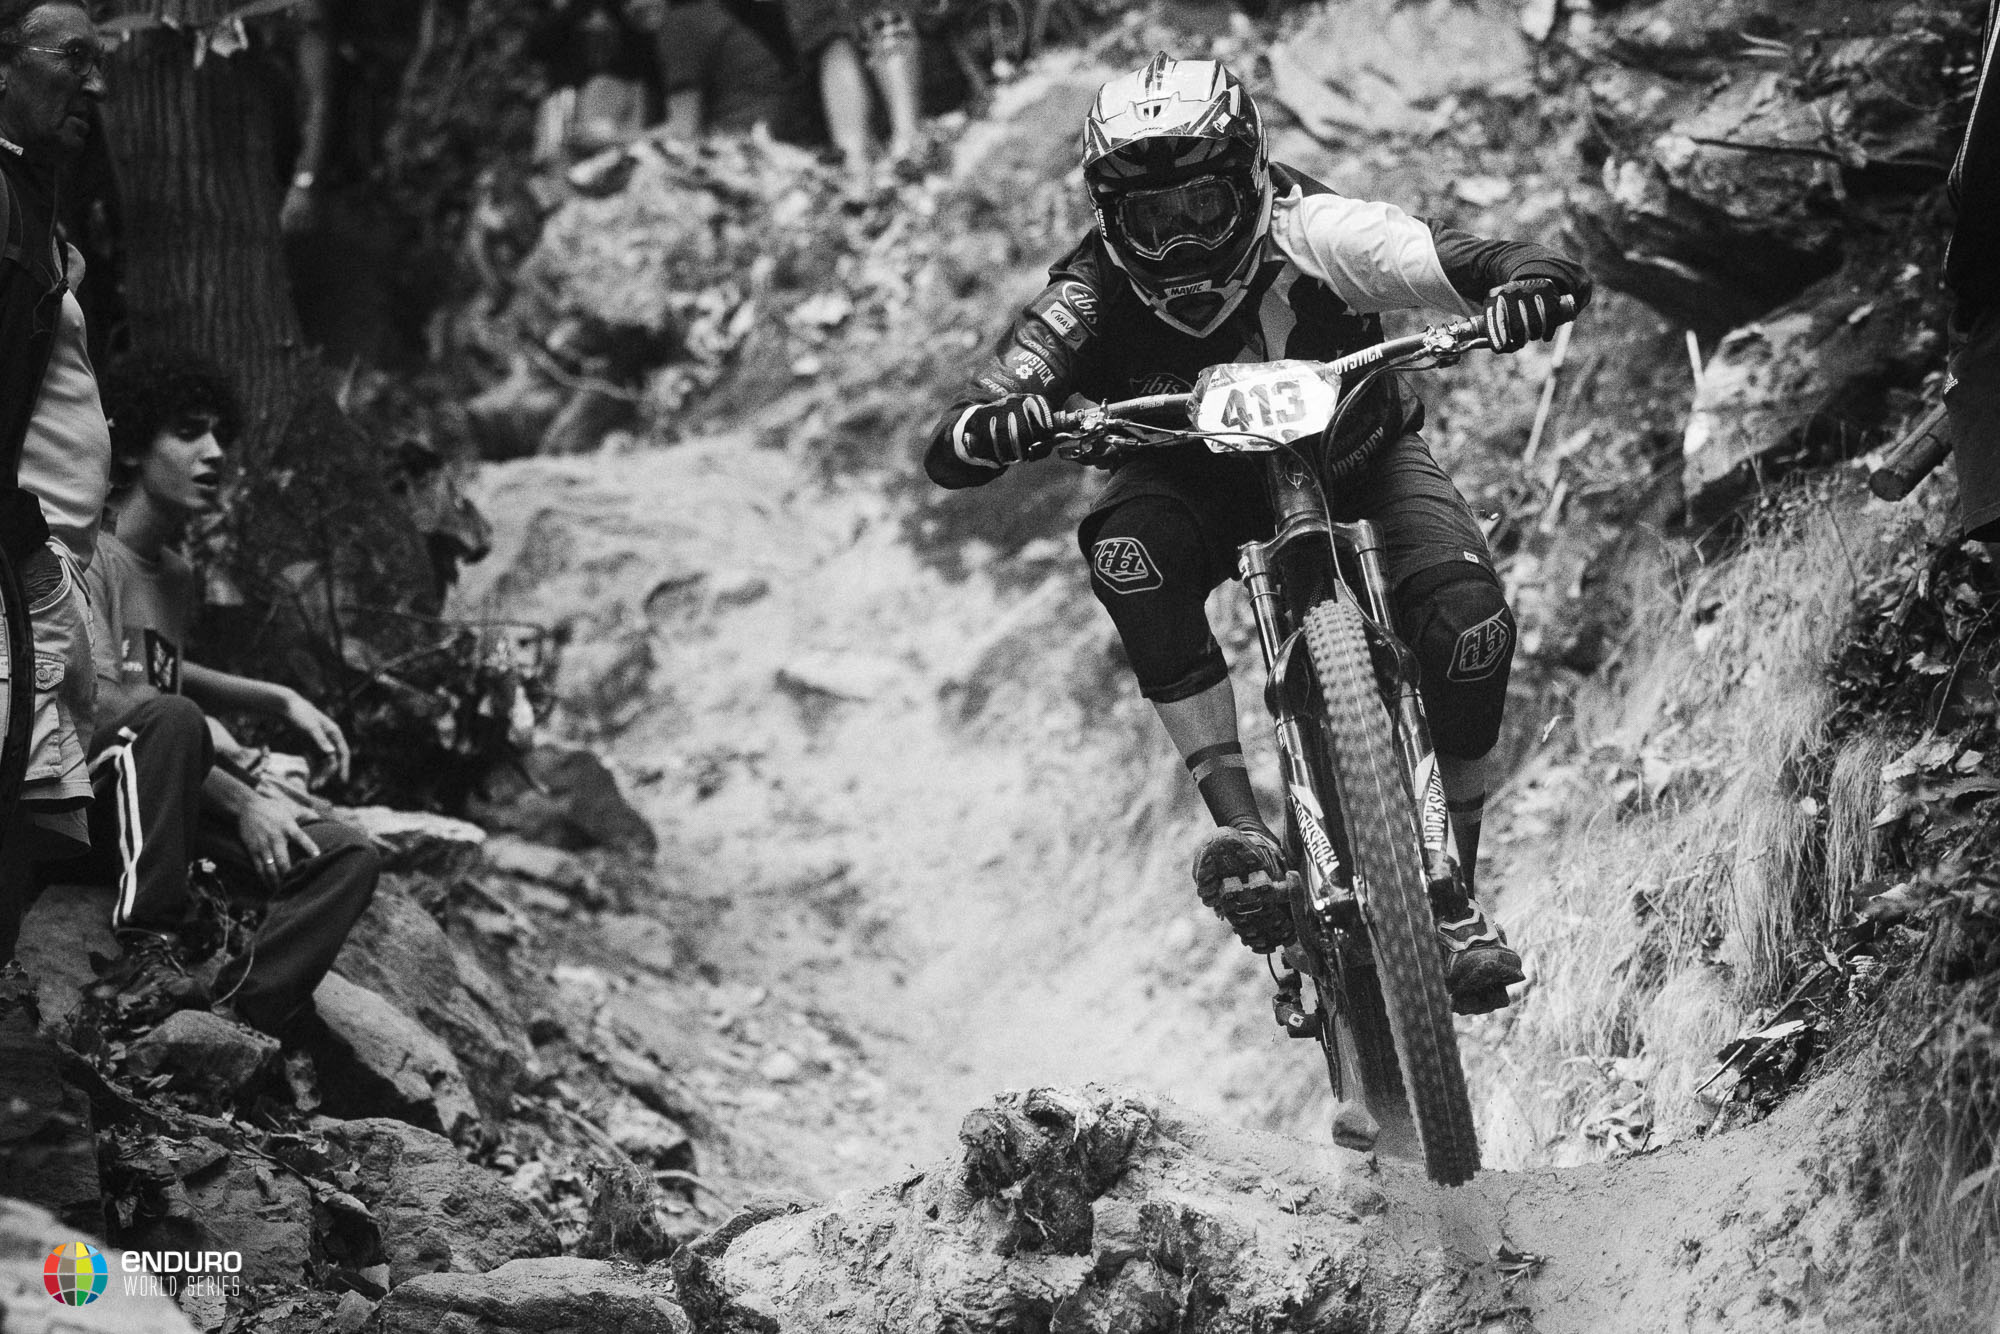 Anne Carolin Chausson raced her way to third place today, her last ever day of EWS racing as she's not racing tomorrow